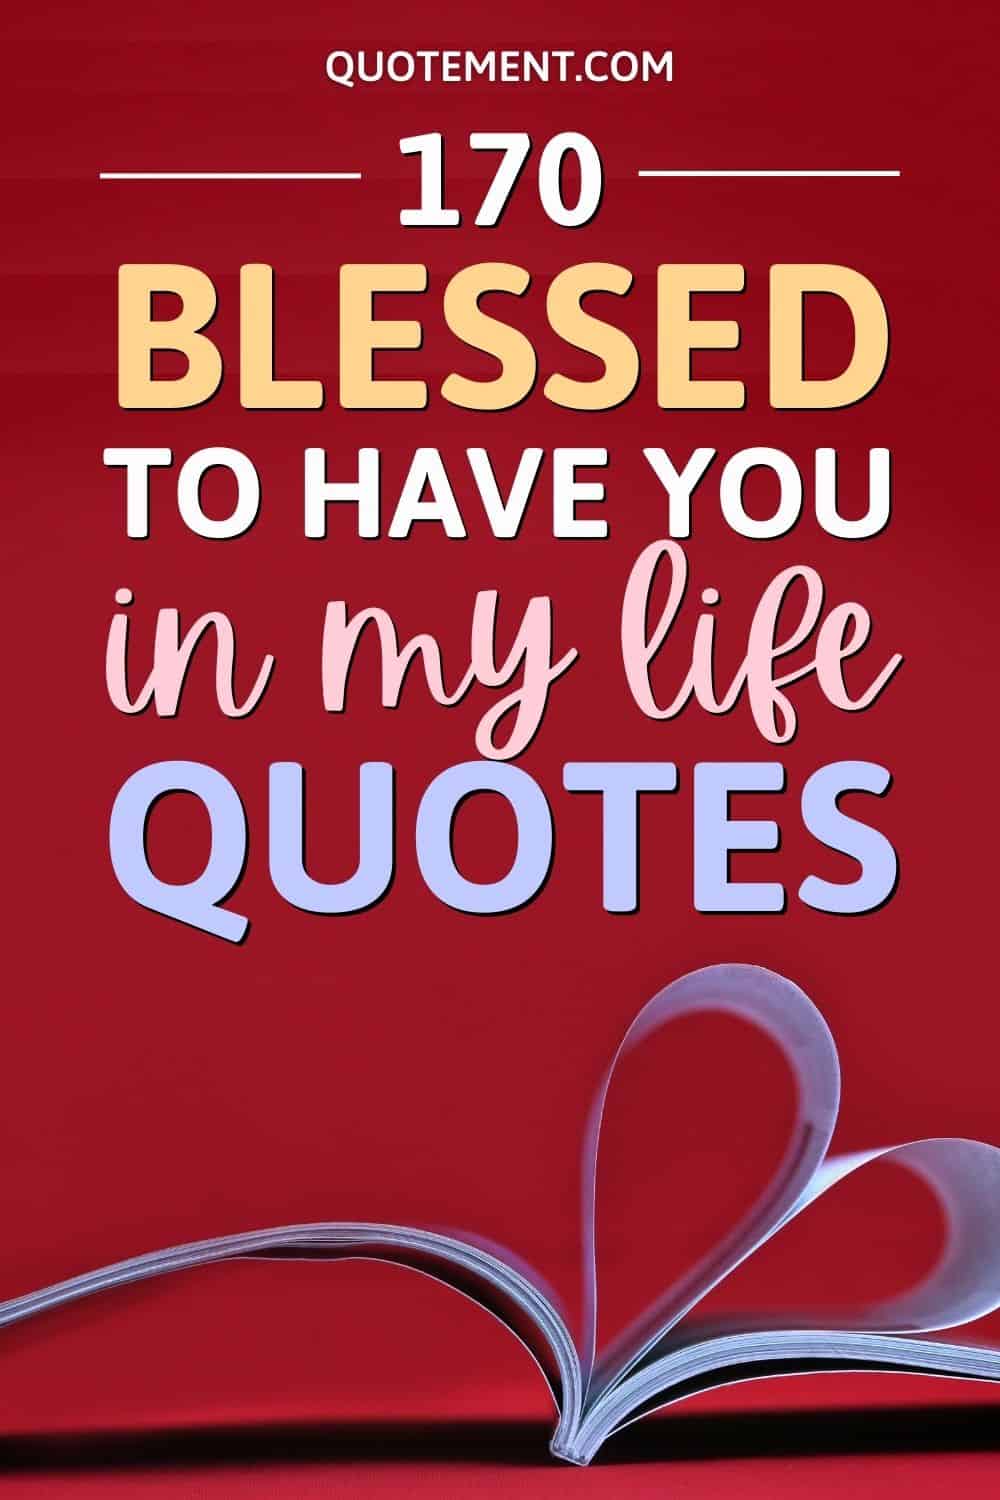 170 Blessed To Have You In My Life Quotes To Show Your Love